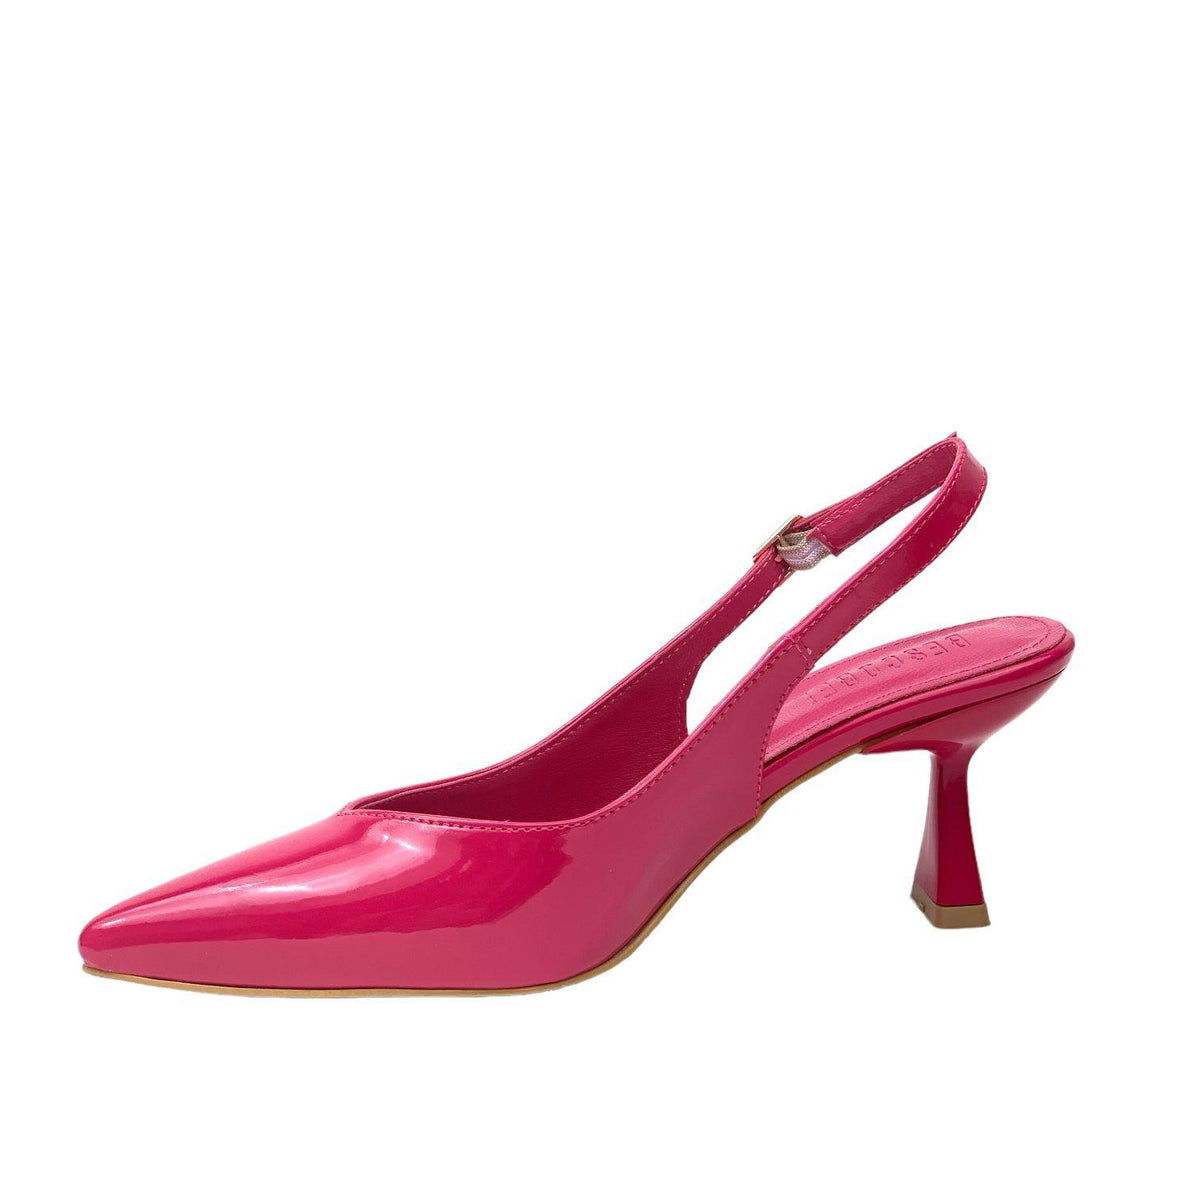 Women's Pasge Fuchsia Patent Leather Material Pointed Toe Heeled Sandals - STREETMODE™